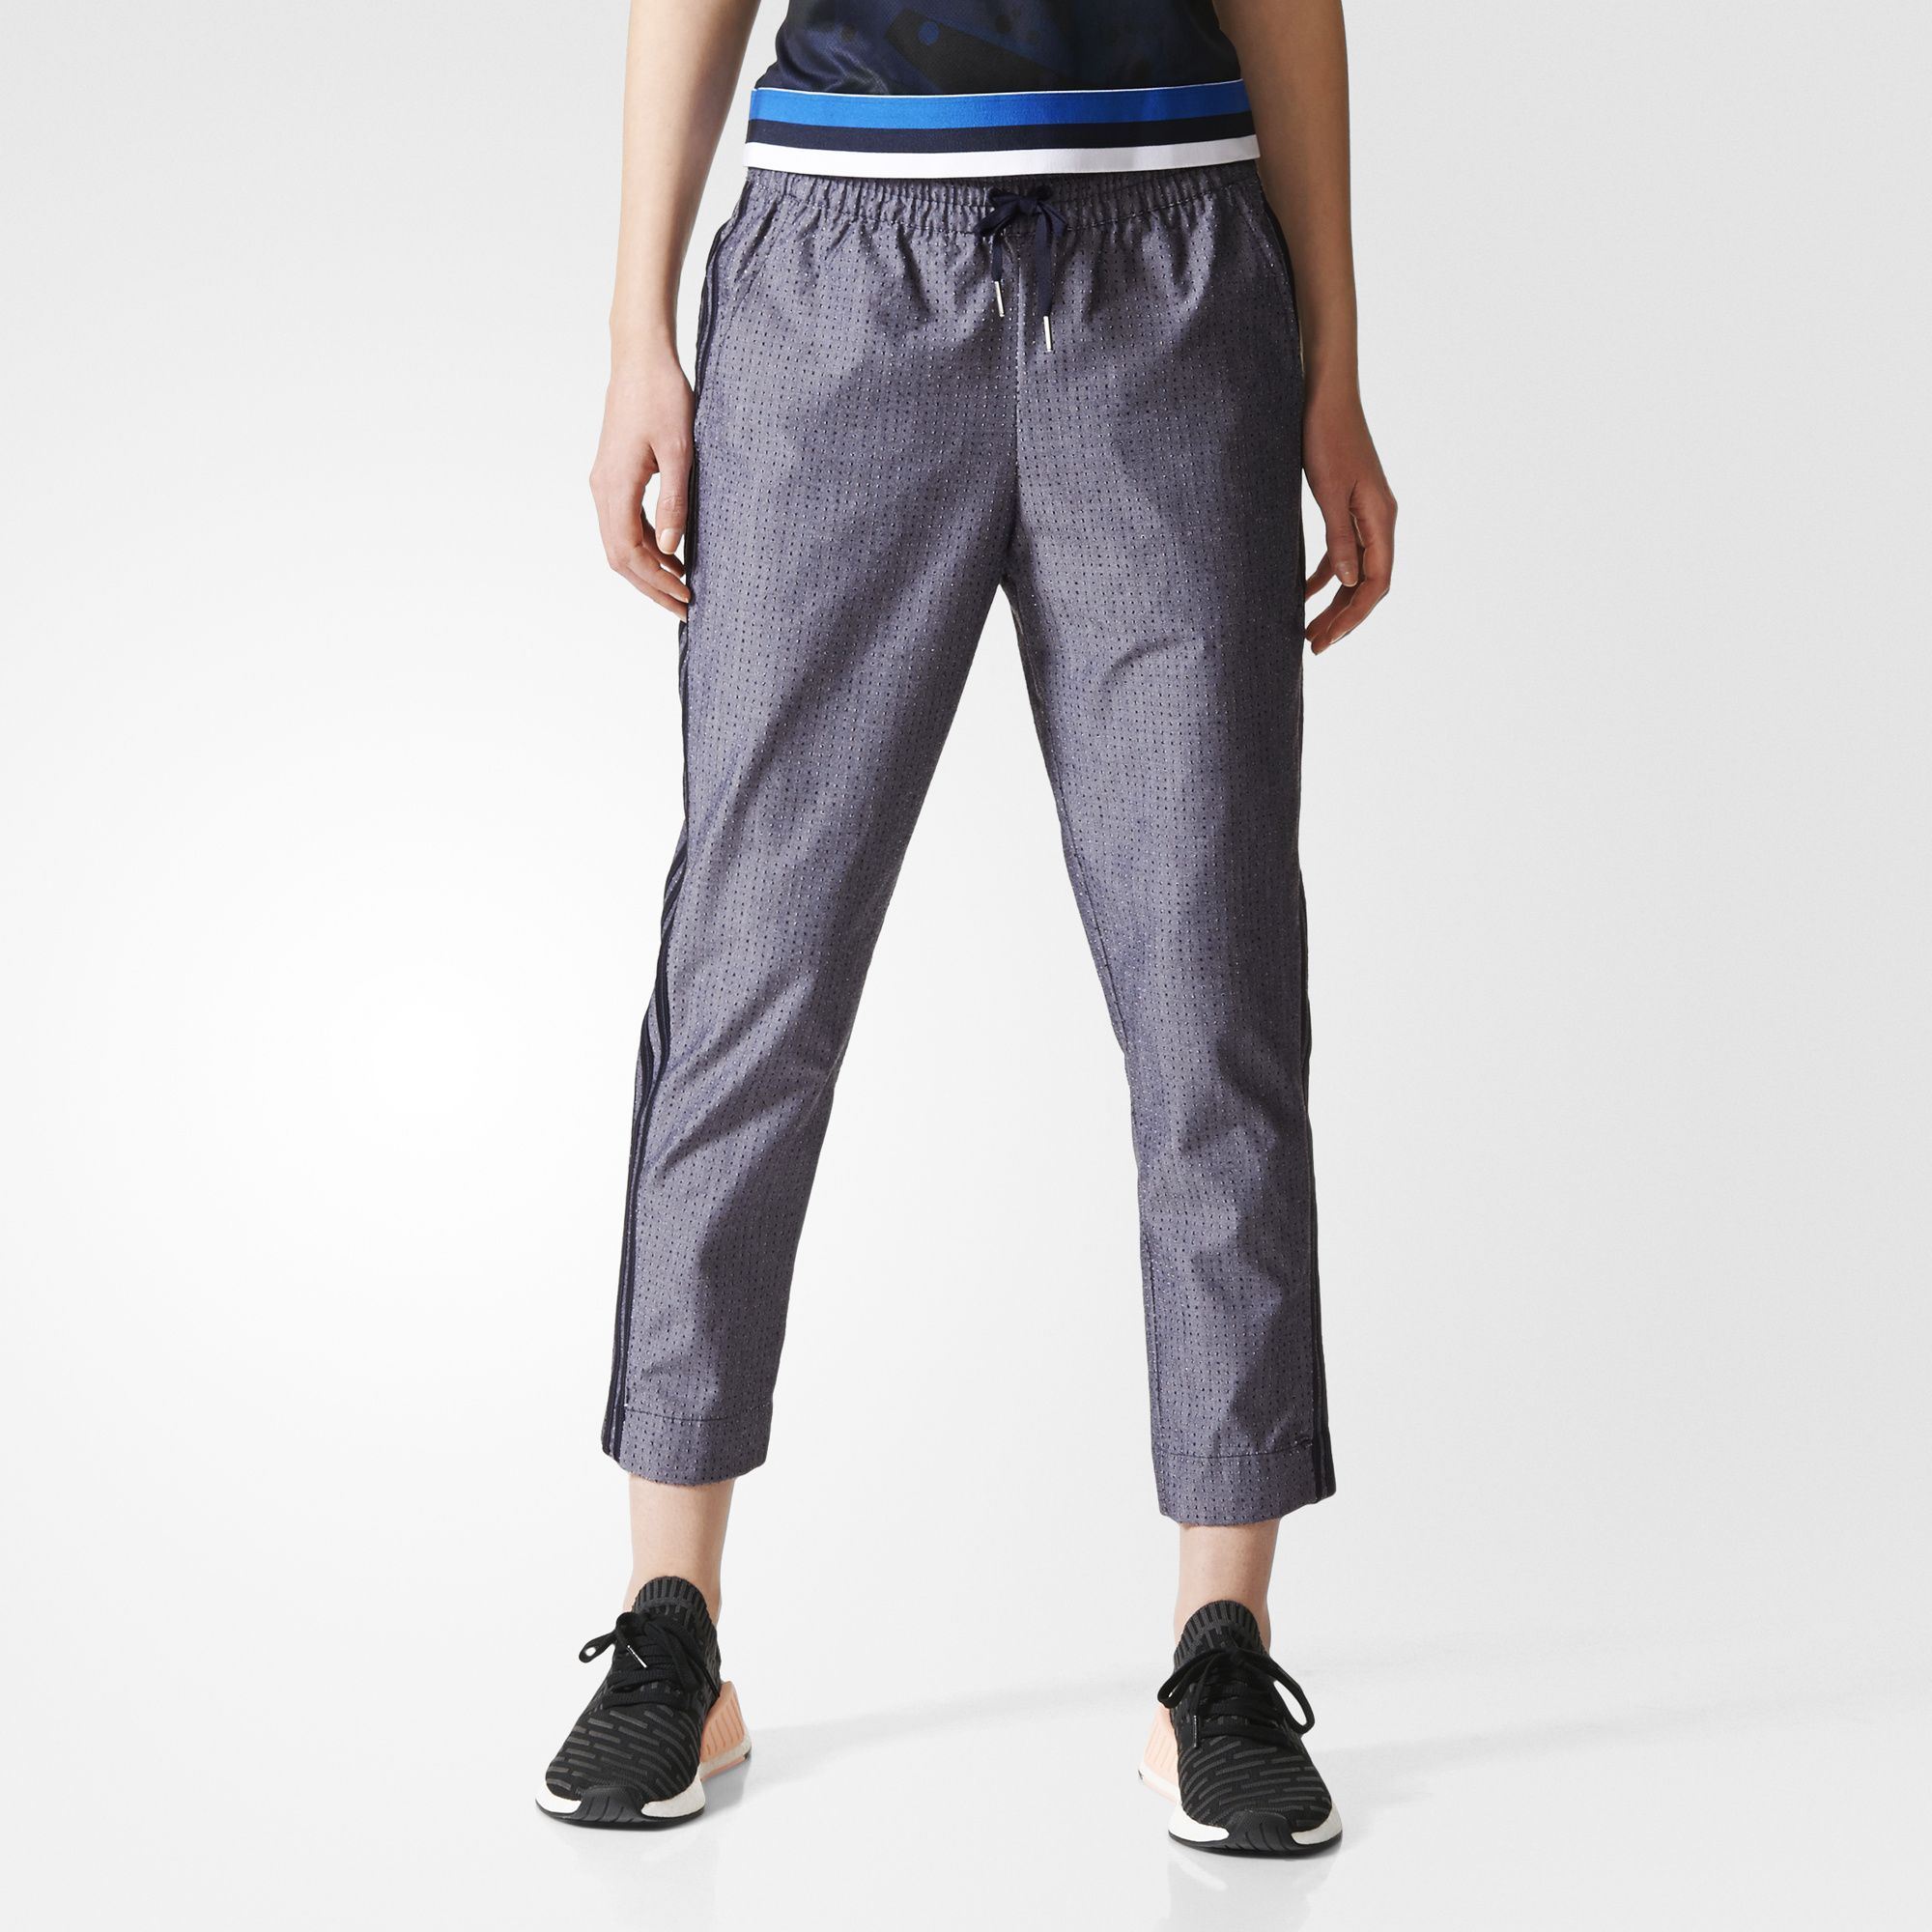 cropped adidas track pants